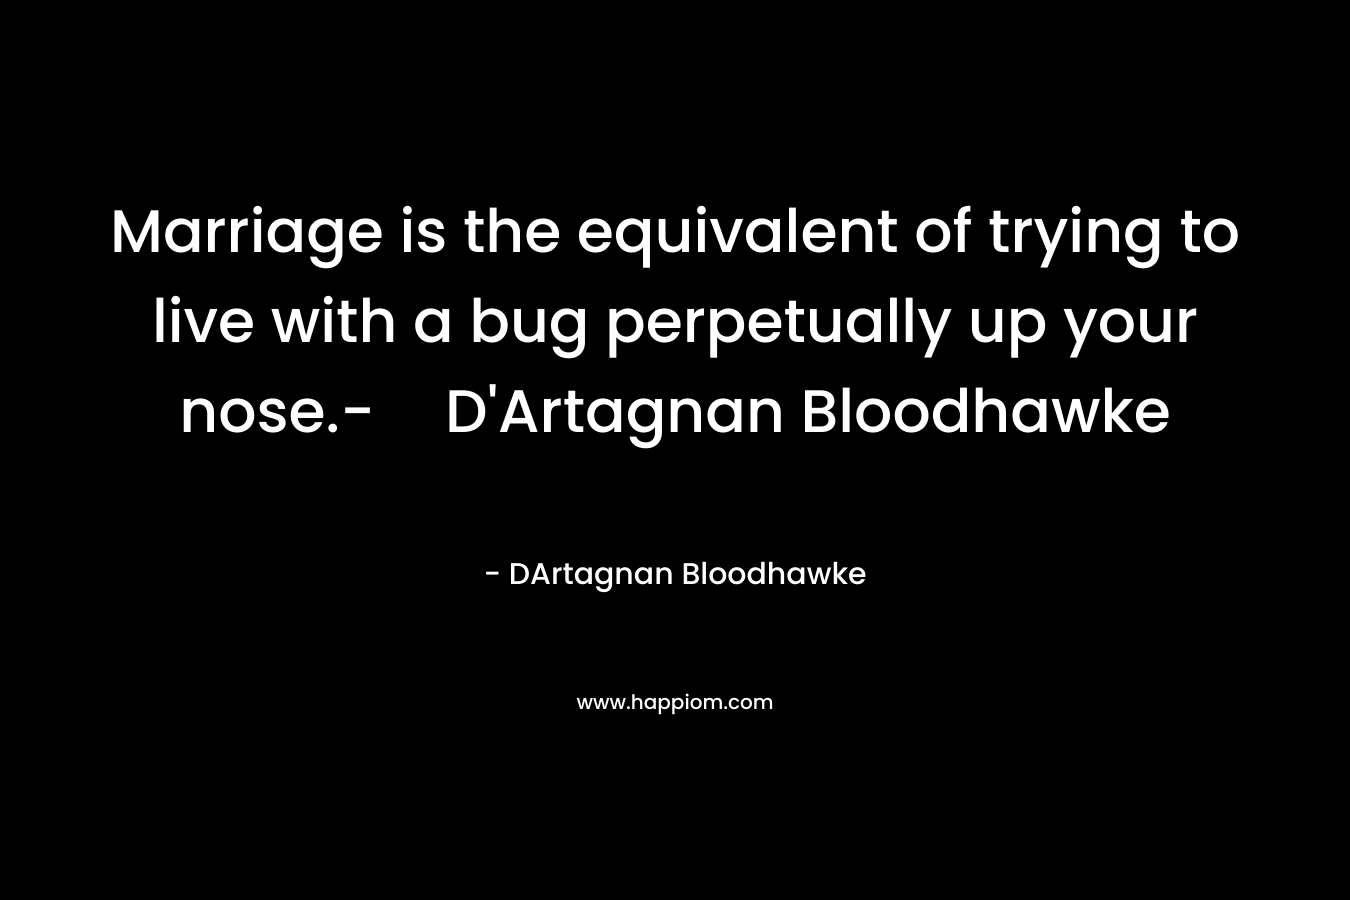 Marriage is the equivalent of trying to live with a bug perpetually up your nose.-D'Artagnan Bloodhawke